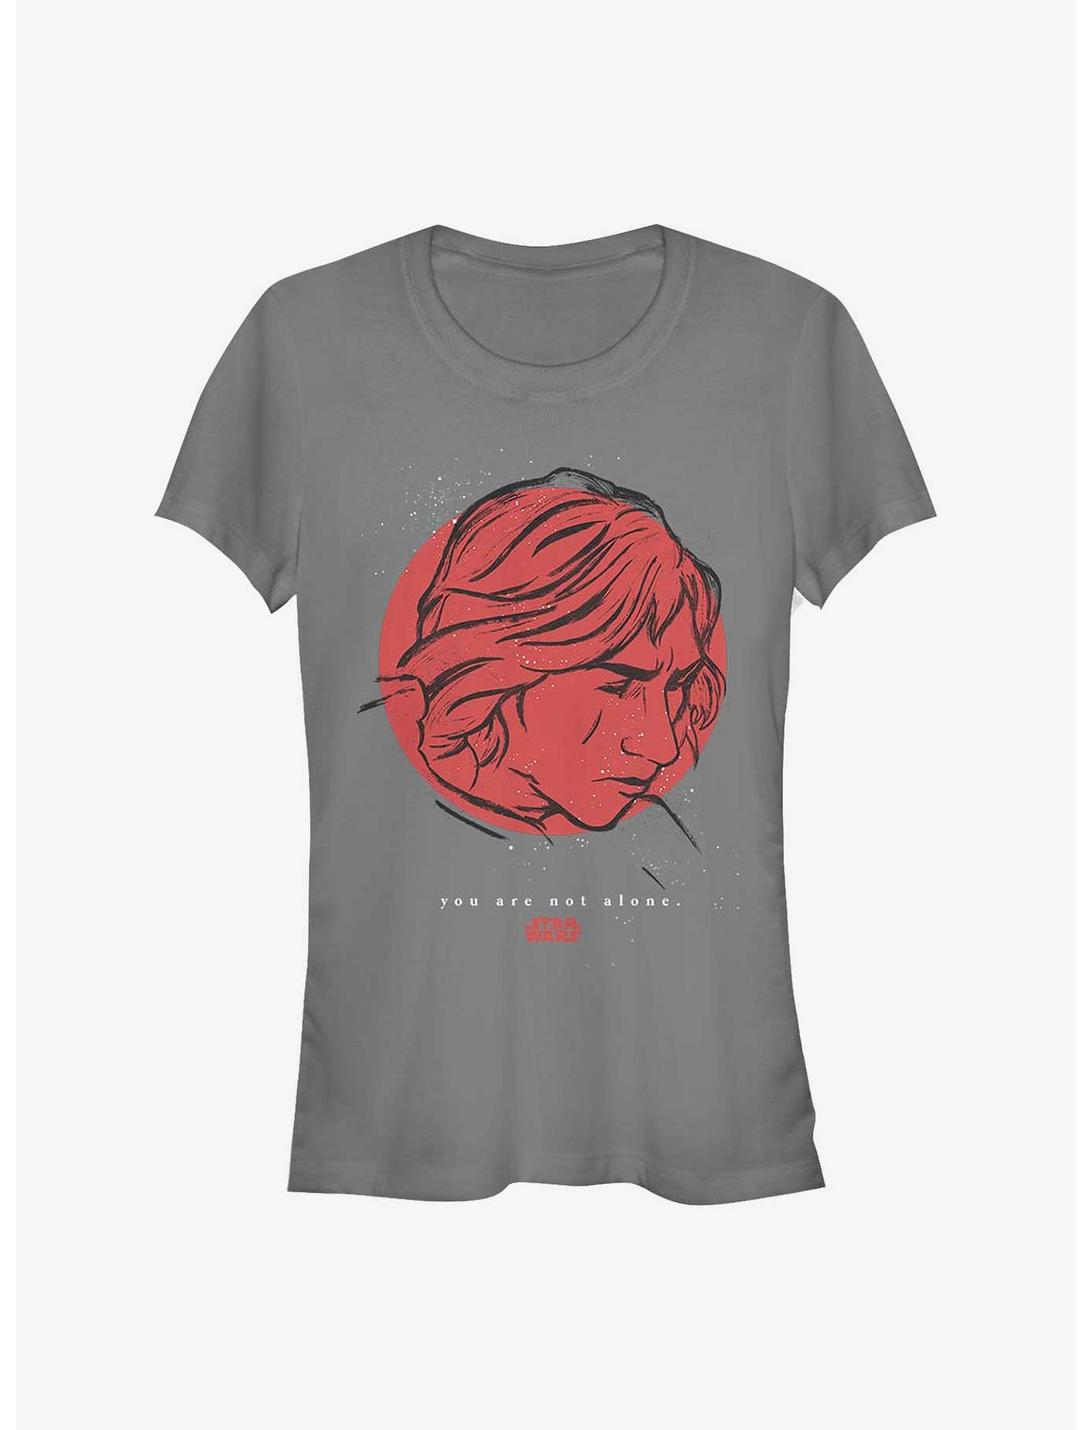 Star Wars: Episode VIII - The Last Jedi Kylo Ren You Are Not Alone Girls T-Shirt, CHARCOAL, hi-res